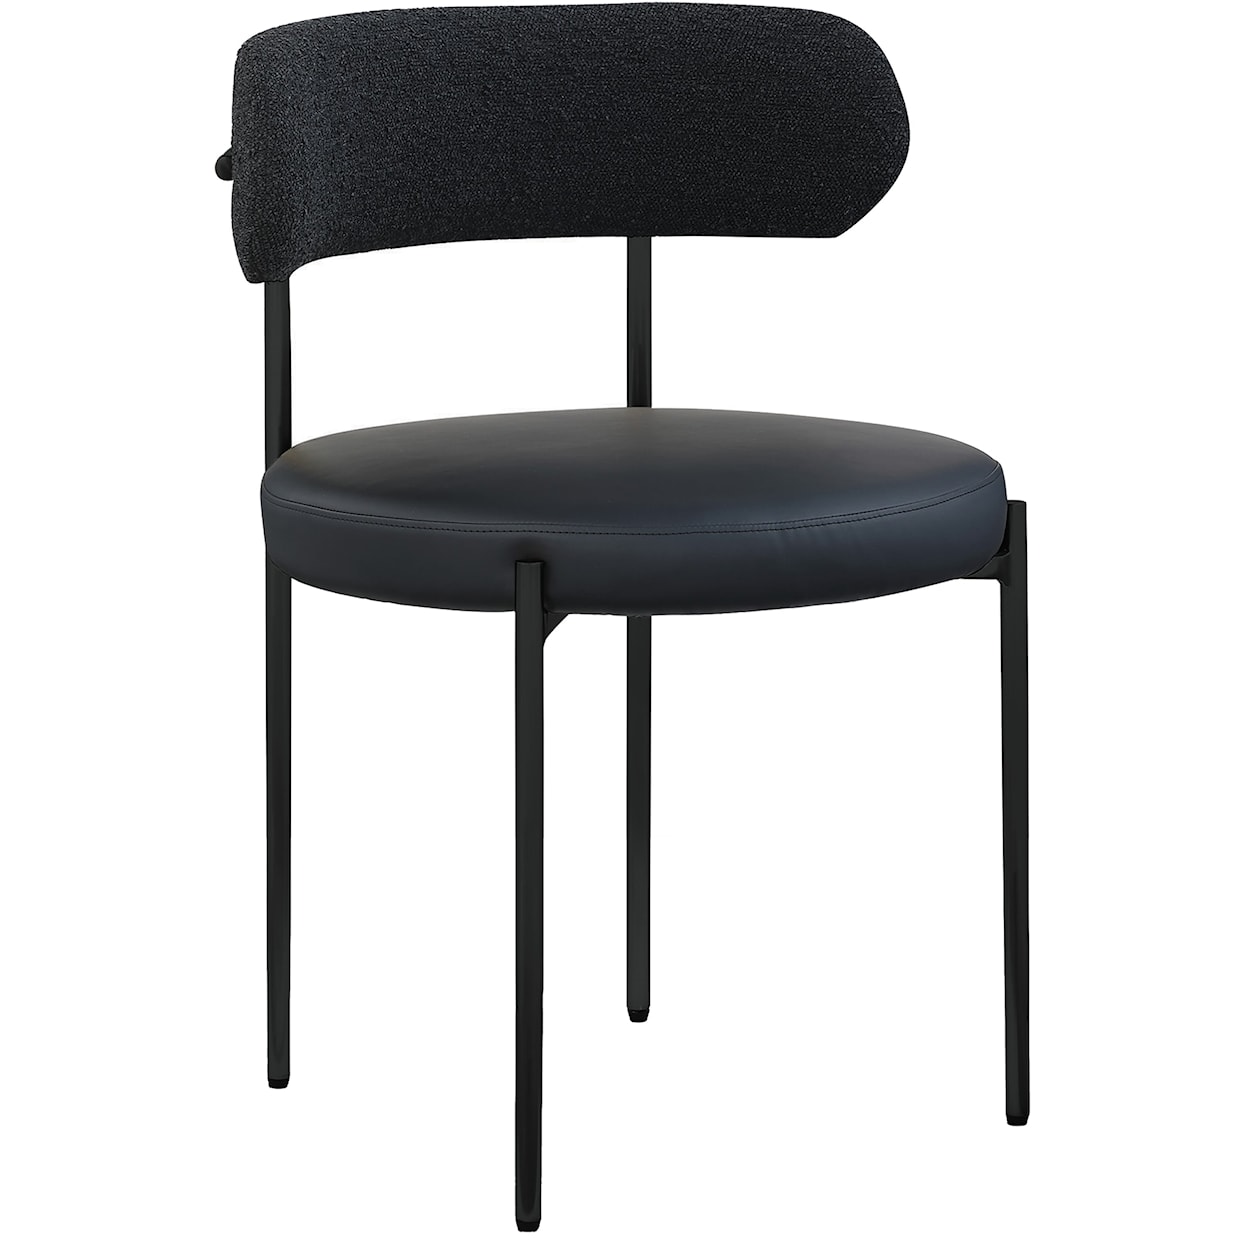 Meridian Furniture Beacon Dining Chair